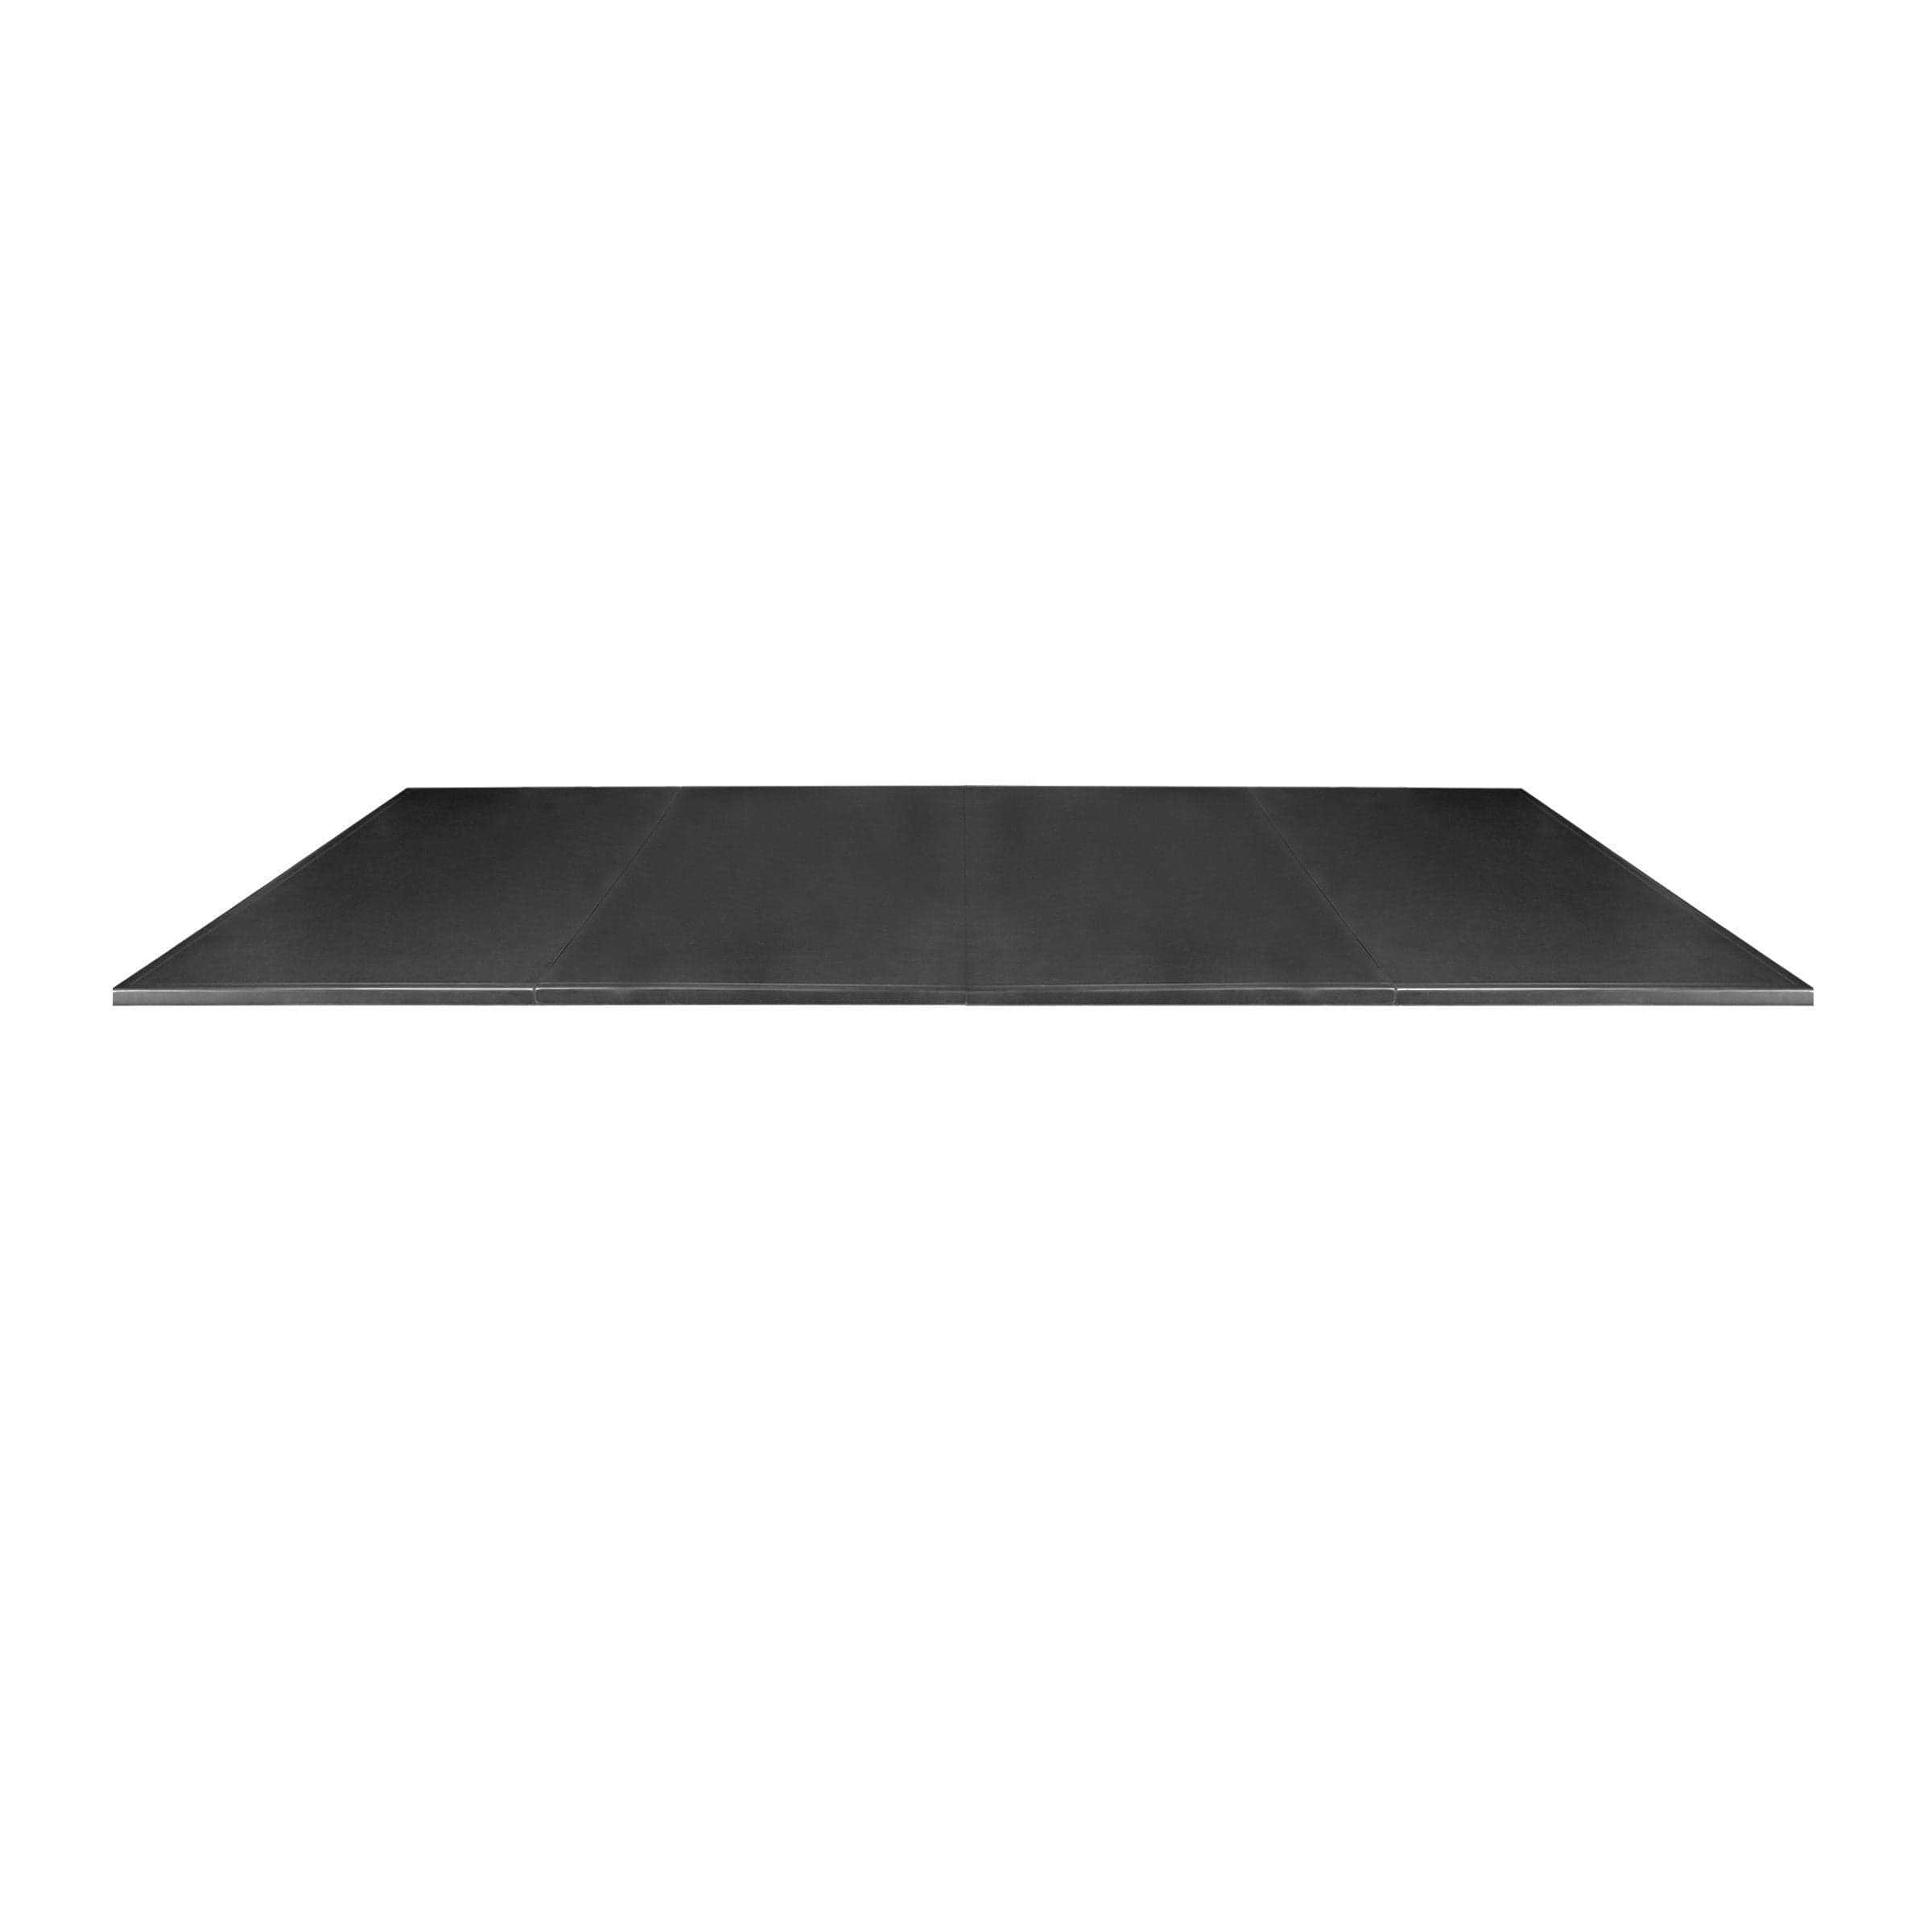 Imperial Game Tabls and Furniture Imperial - 7' Black Dining Top - 26-500